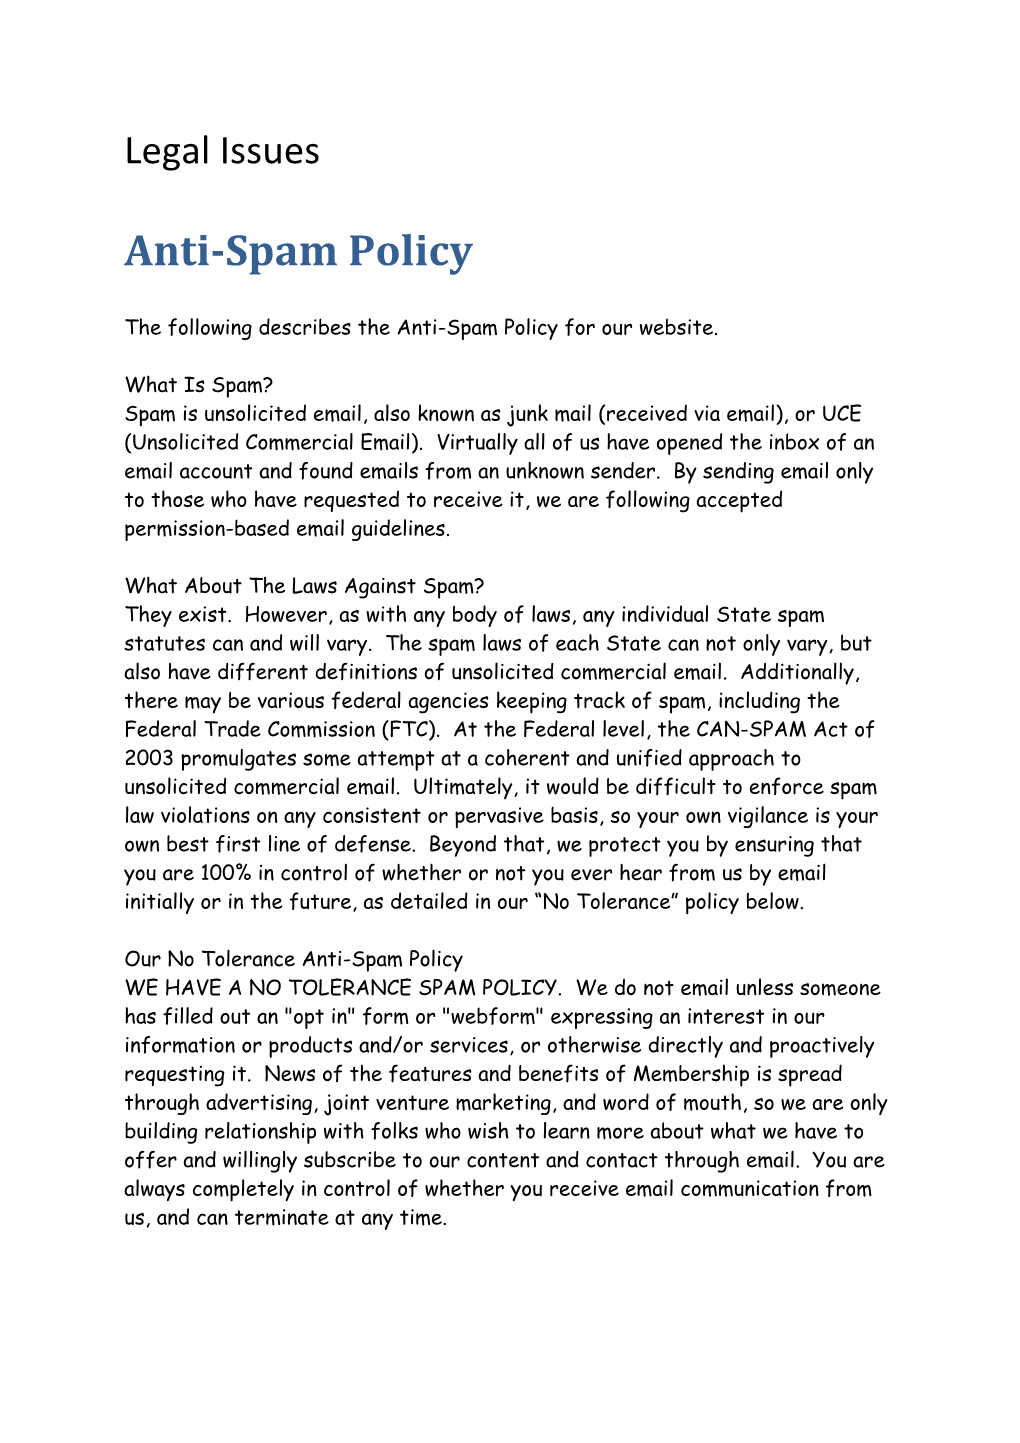 The Following Describes the Anti-Spam Policy for Our Website